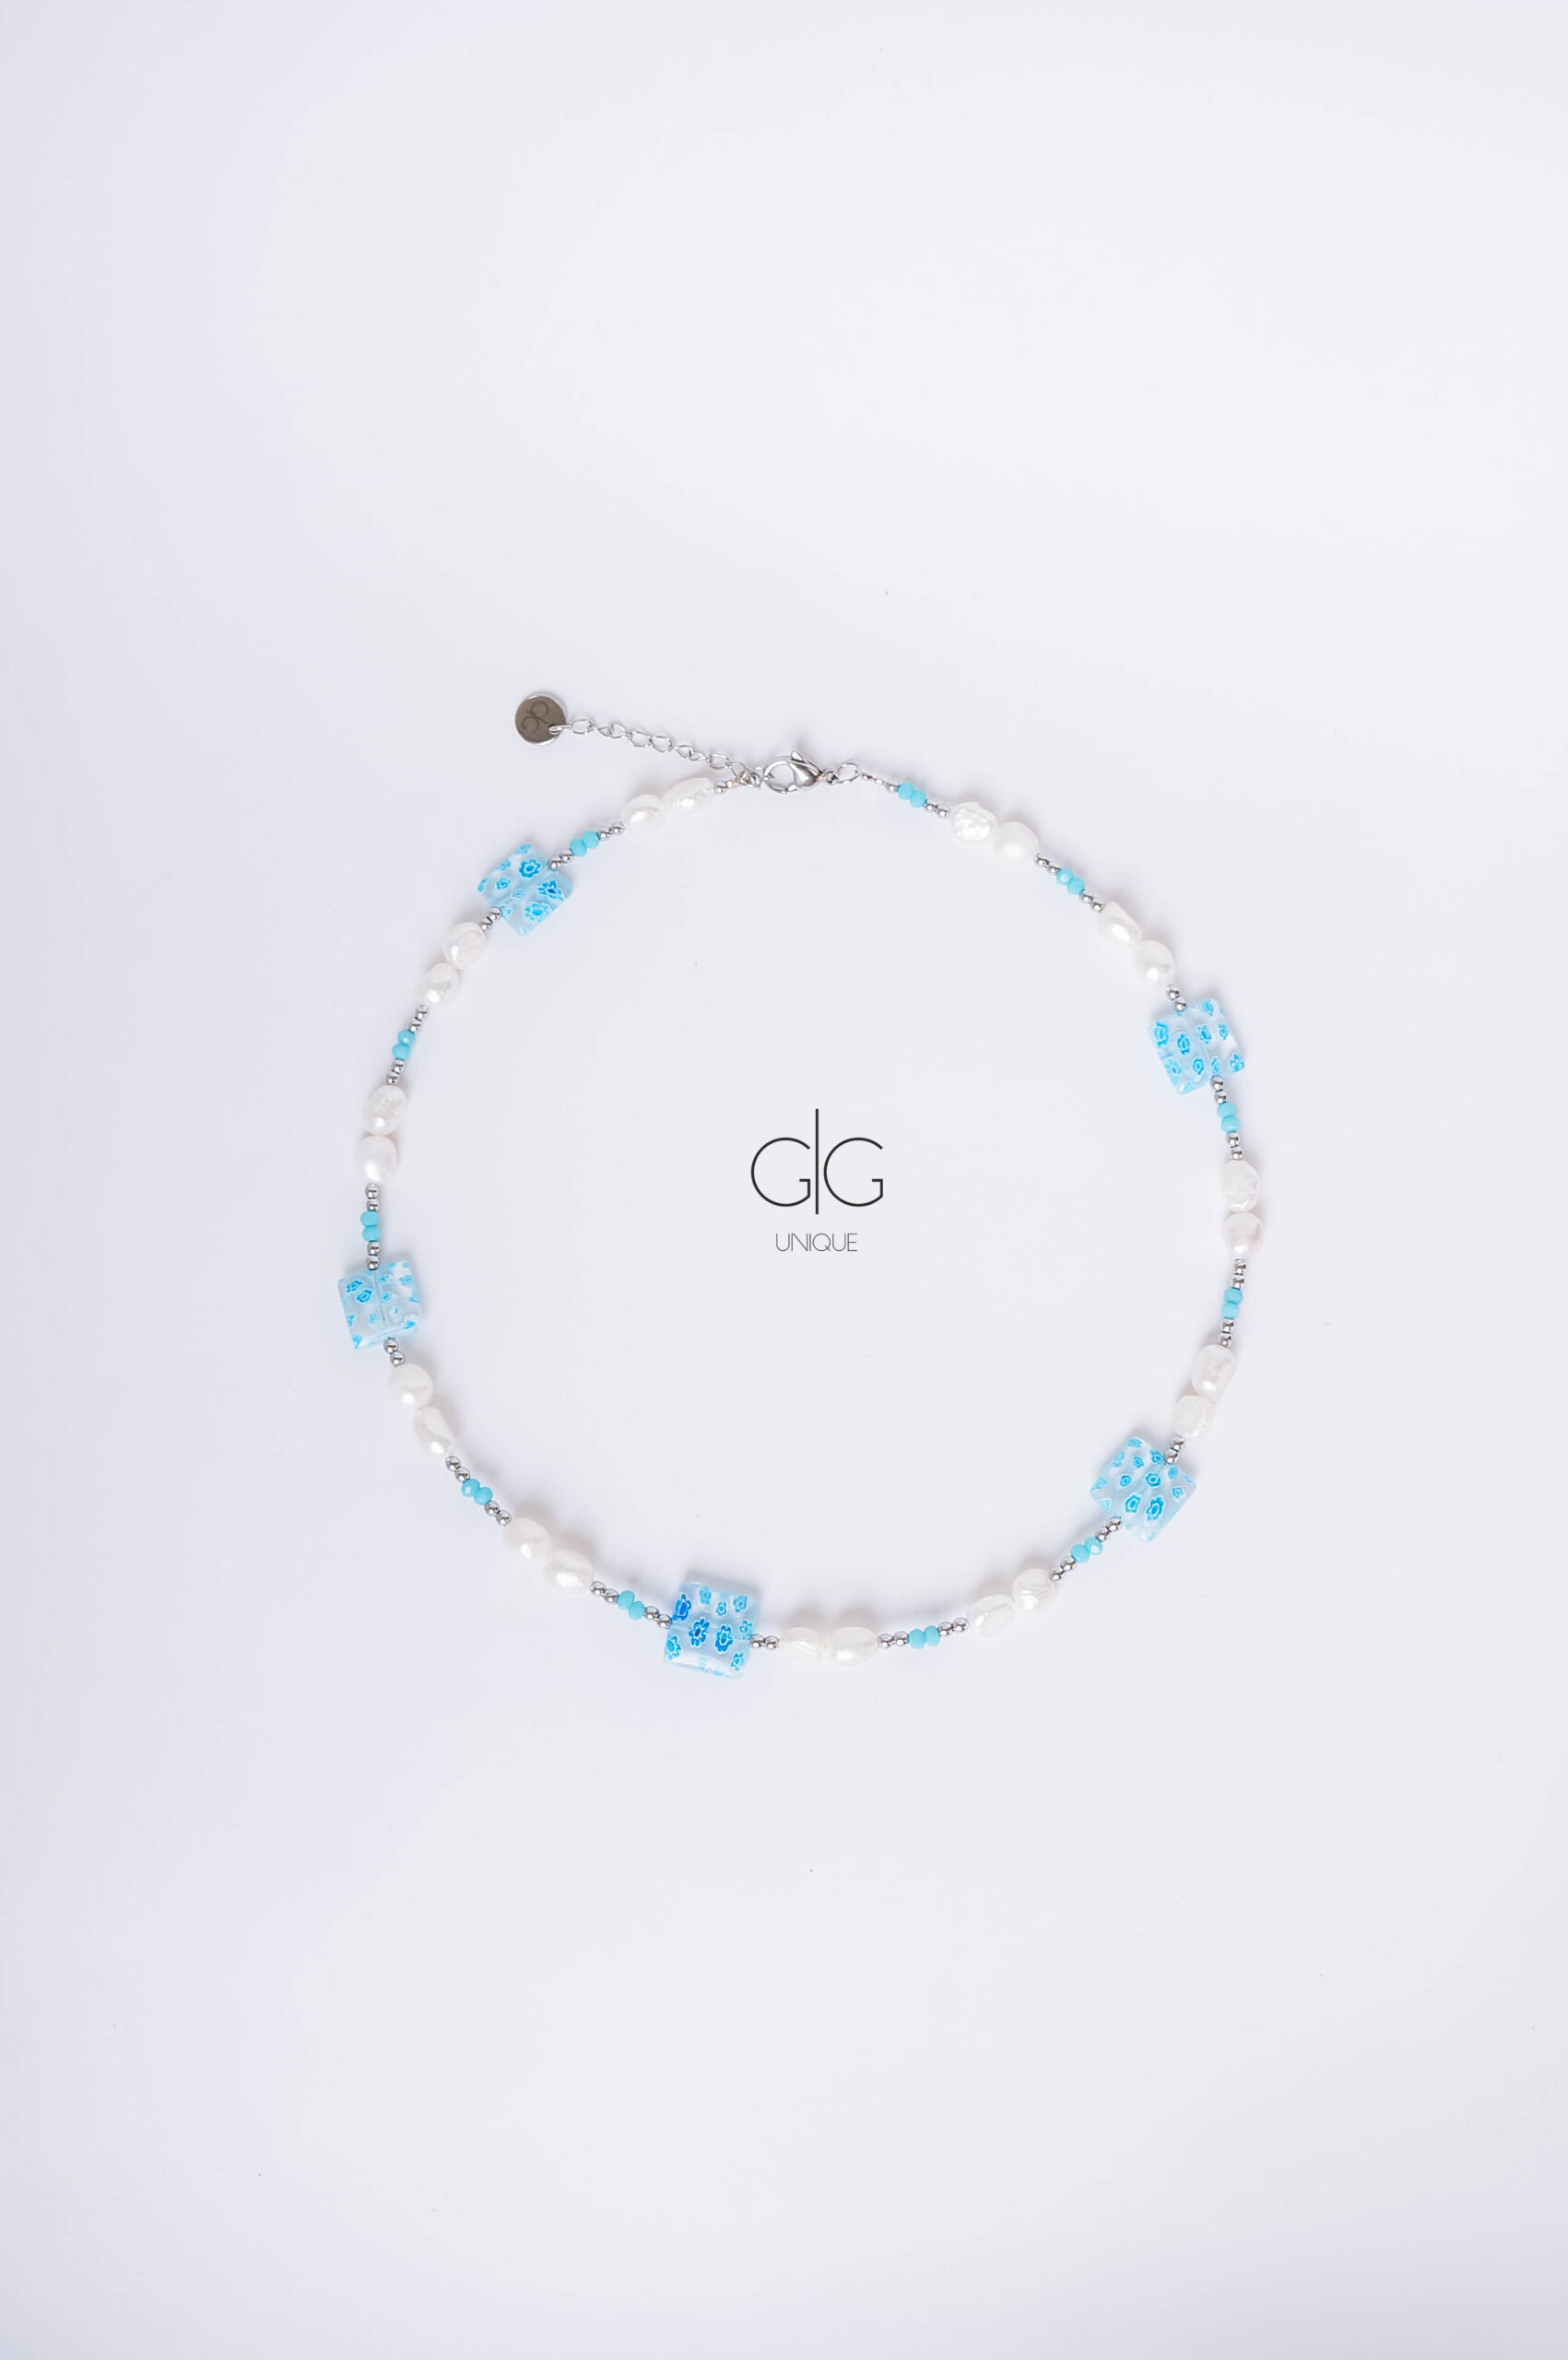 Pearl and blue flowers necklace - GG Unique